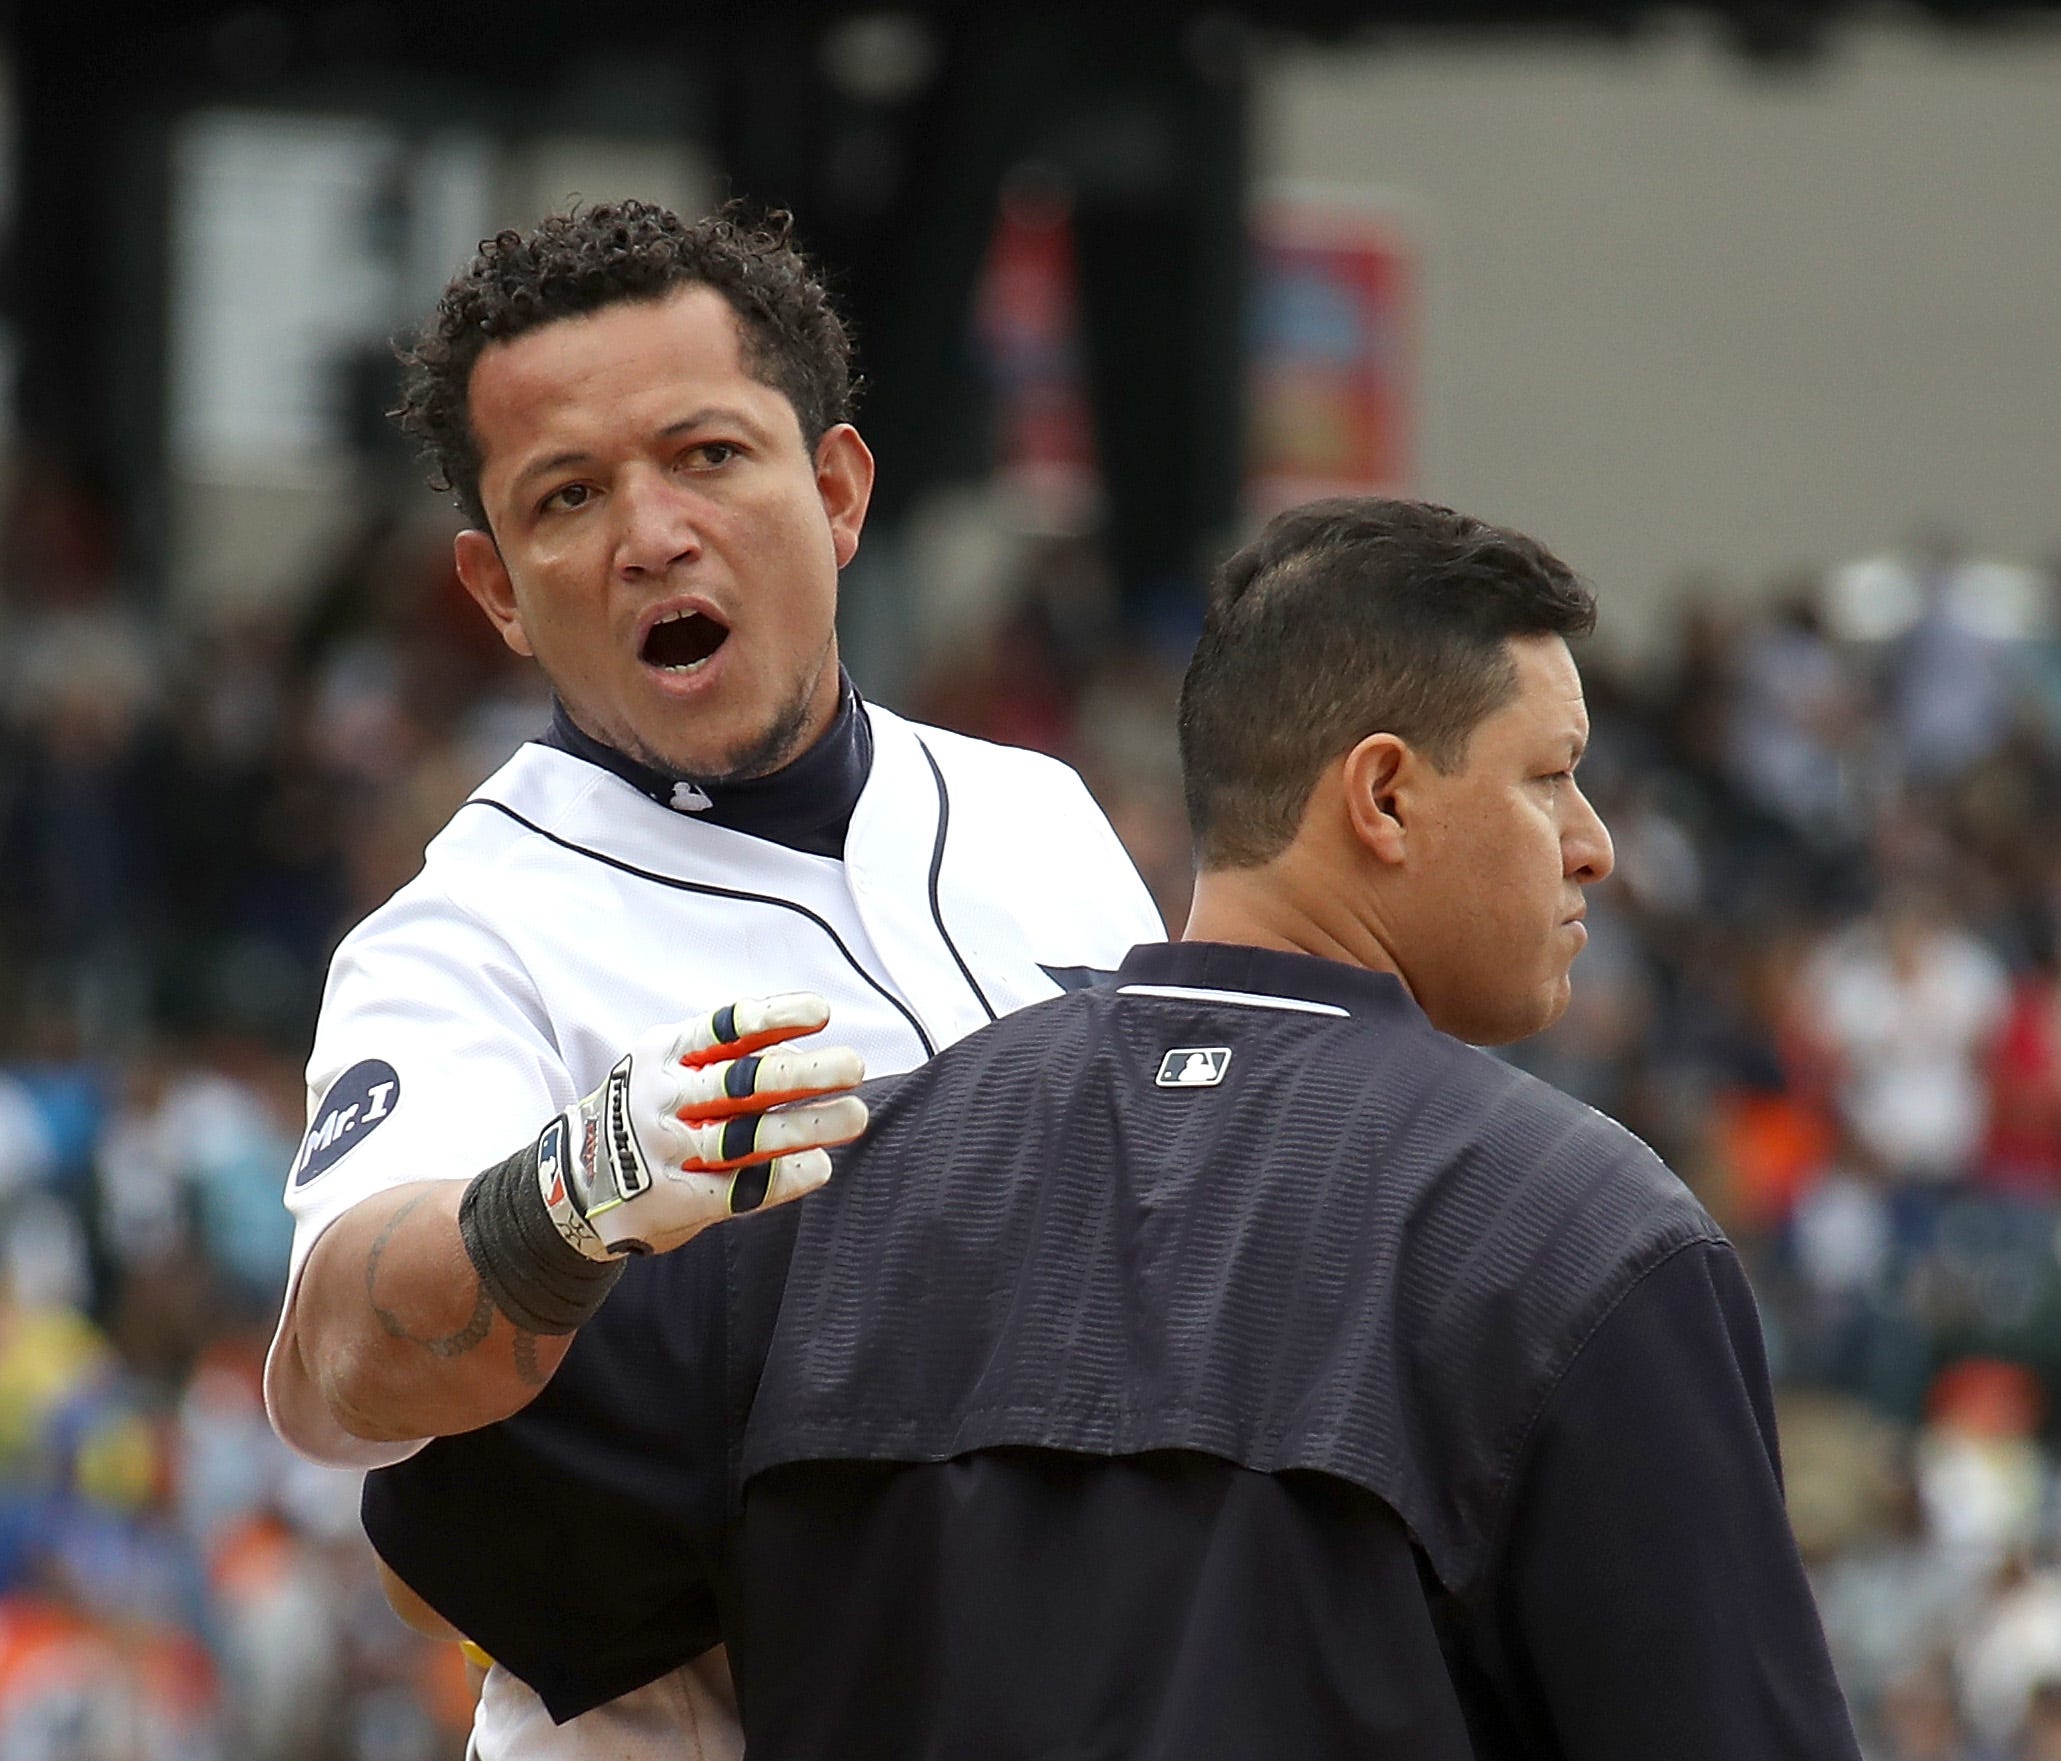 DETROIT, MI - AUGUST 24: Miguel Cabrera #24 of the Detroit Tigers is held back during a sixth inning bench clearing fight with the New York Yankees at Comerica Park on August 24, 2017 in Detroit, Michigan.  (Photo by Gregory Shamus/Getty Images) ORG 